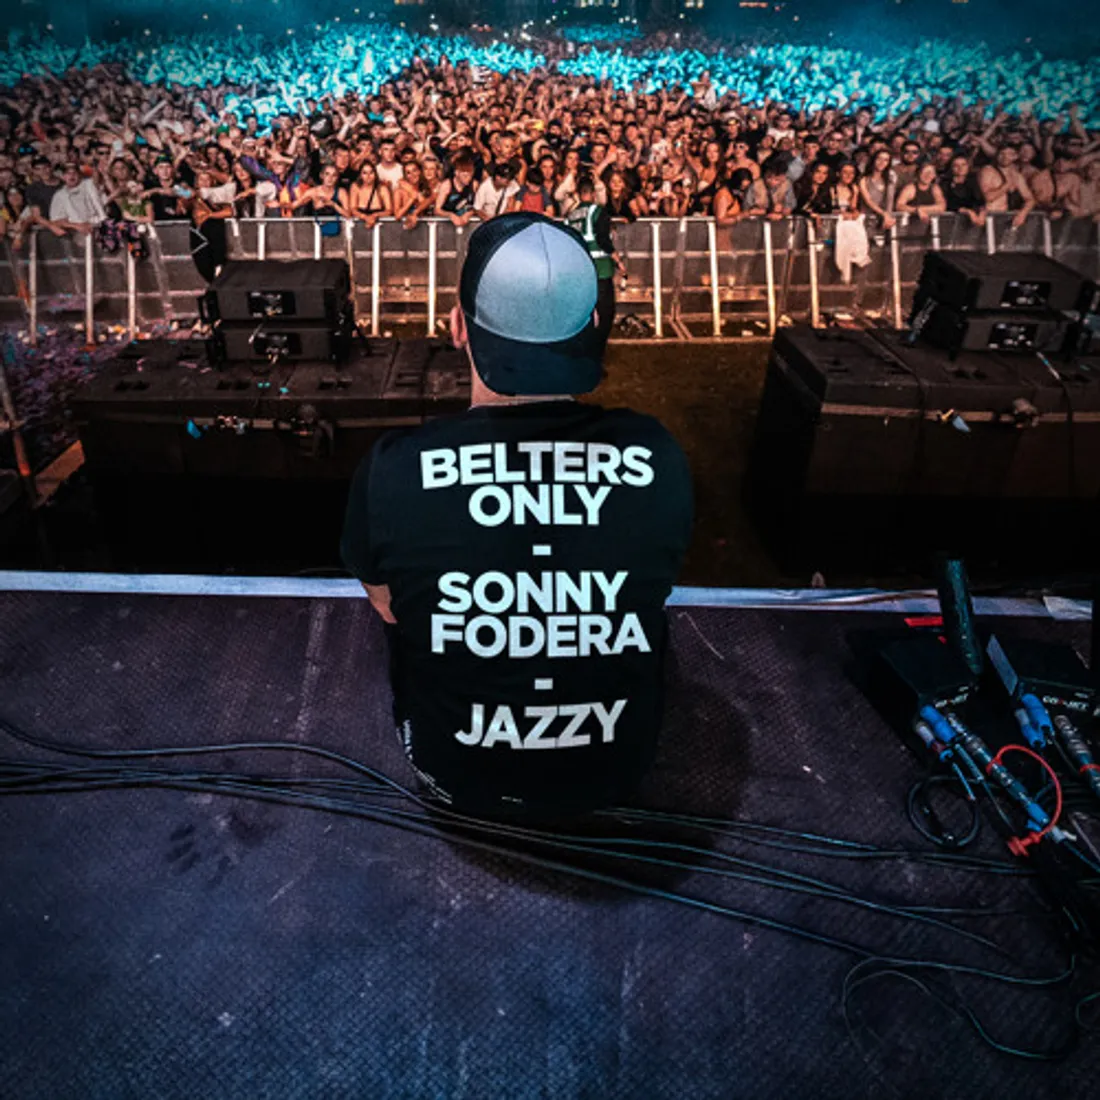 Belters Only, Sonny Fodera, Jazzy - Life Lessons